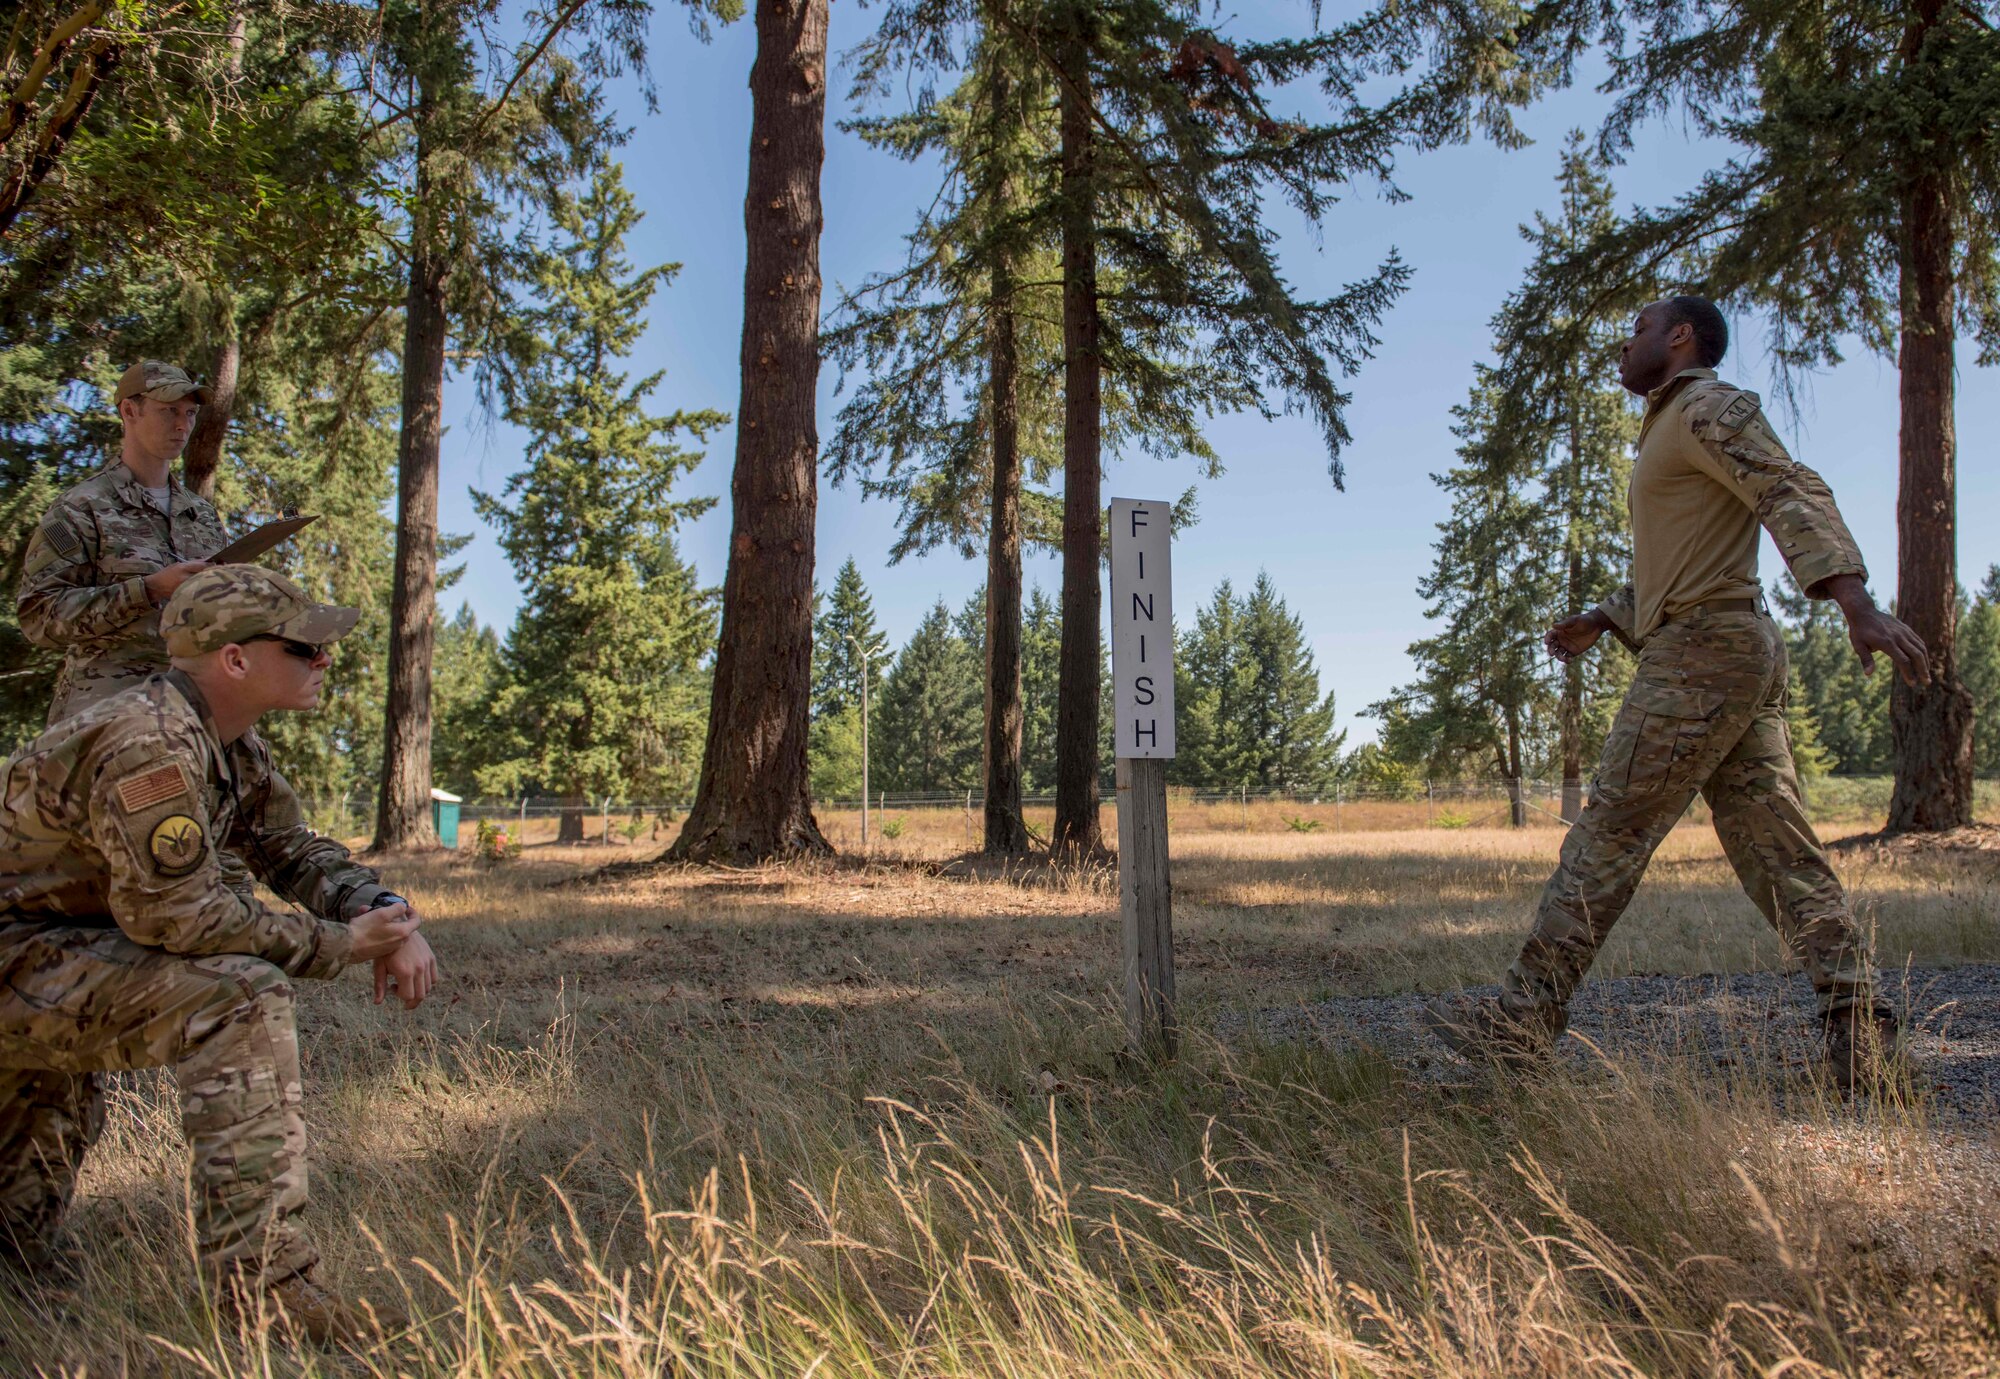 A U.S. Air Force Tactical Air Control Party (TACP) Airman assigned to the 5th Air Support Operations Squadron, Joint Base Lewis-McChord (JBLM), Wash., finishes the obstacle course section of the 2019 Lightning Challenge at JBLM, Wash., July 29, 2019.